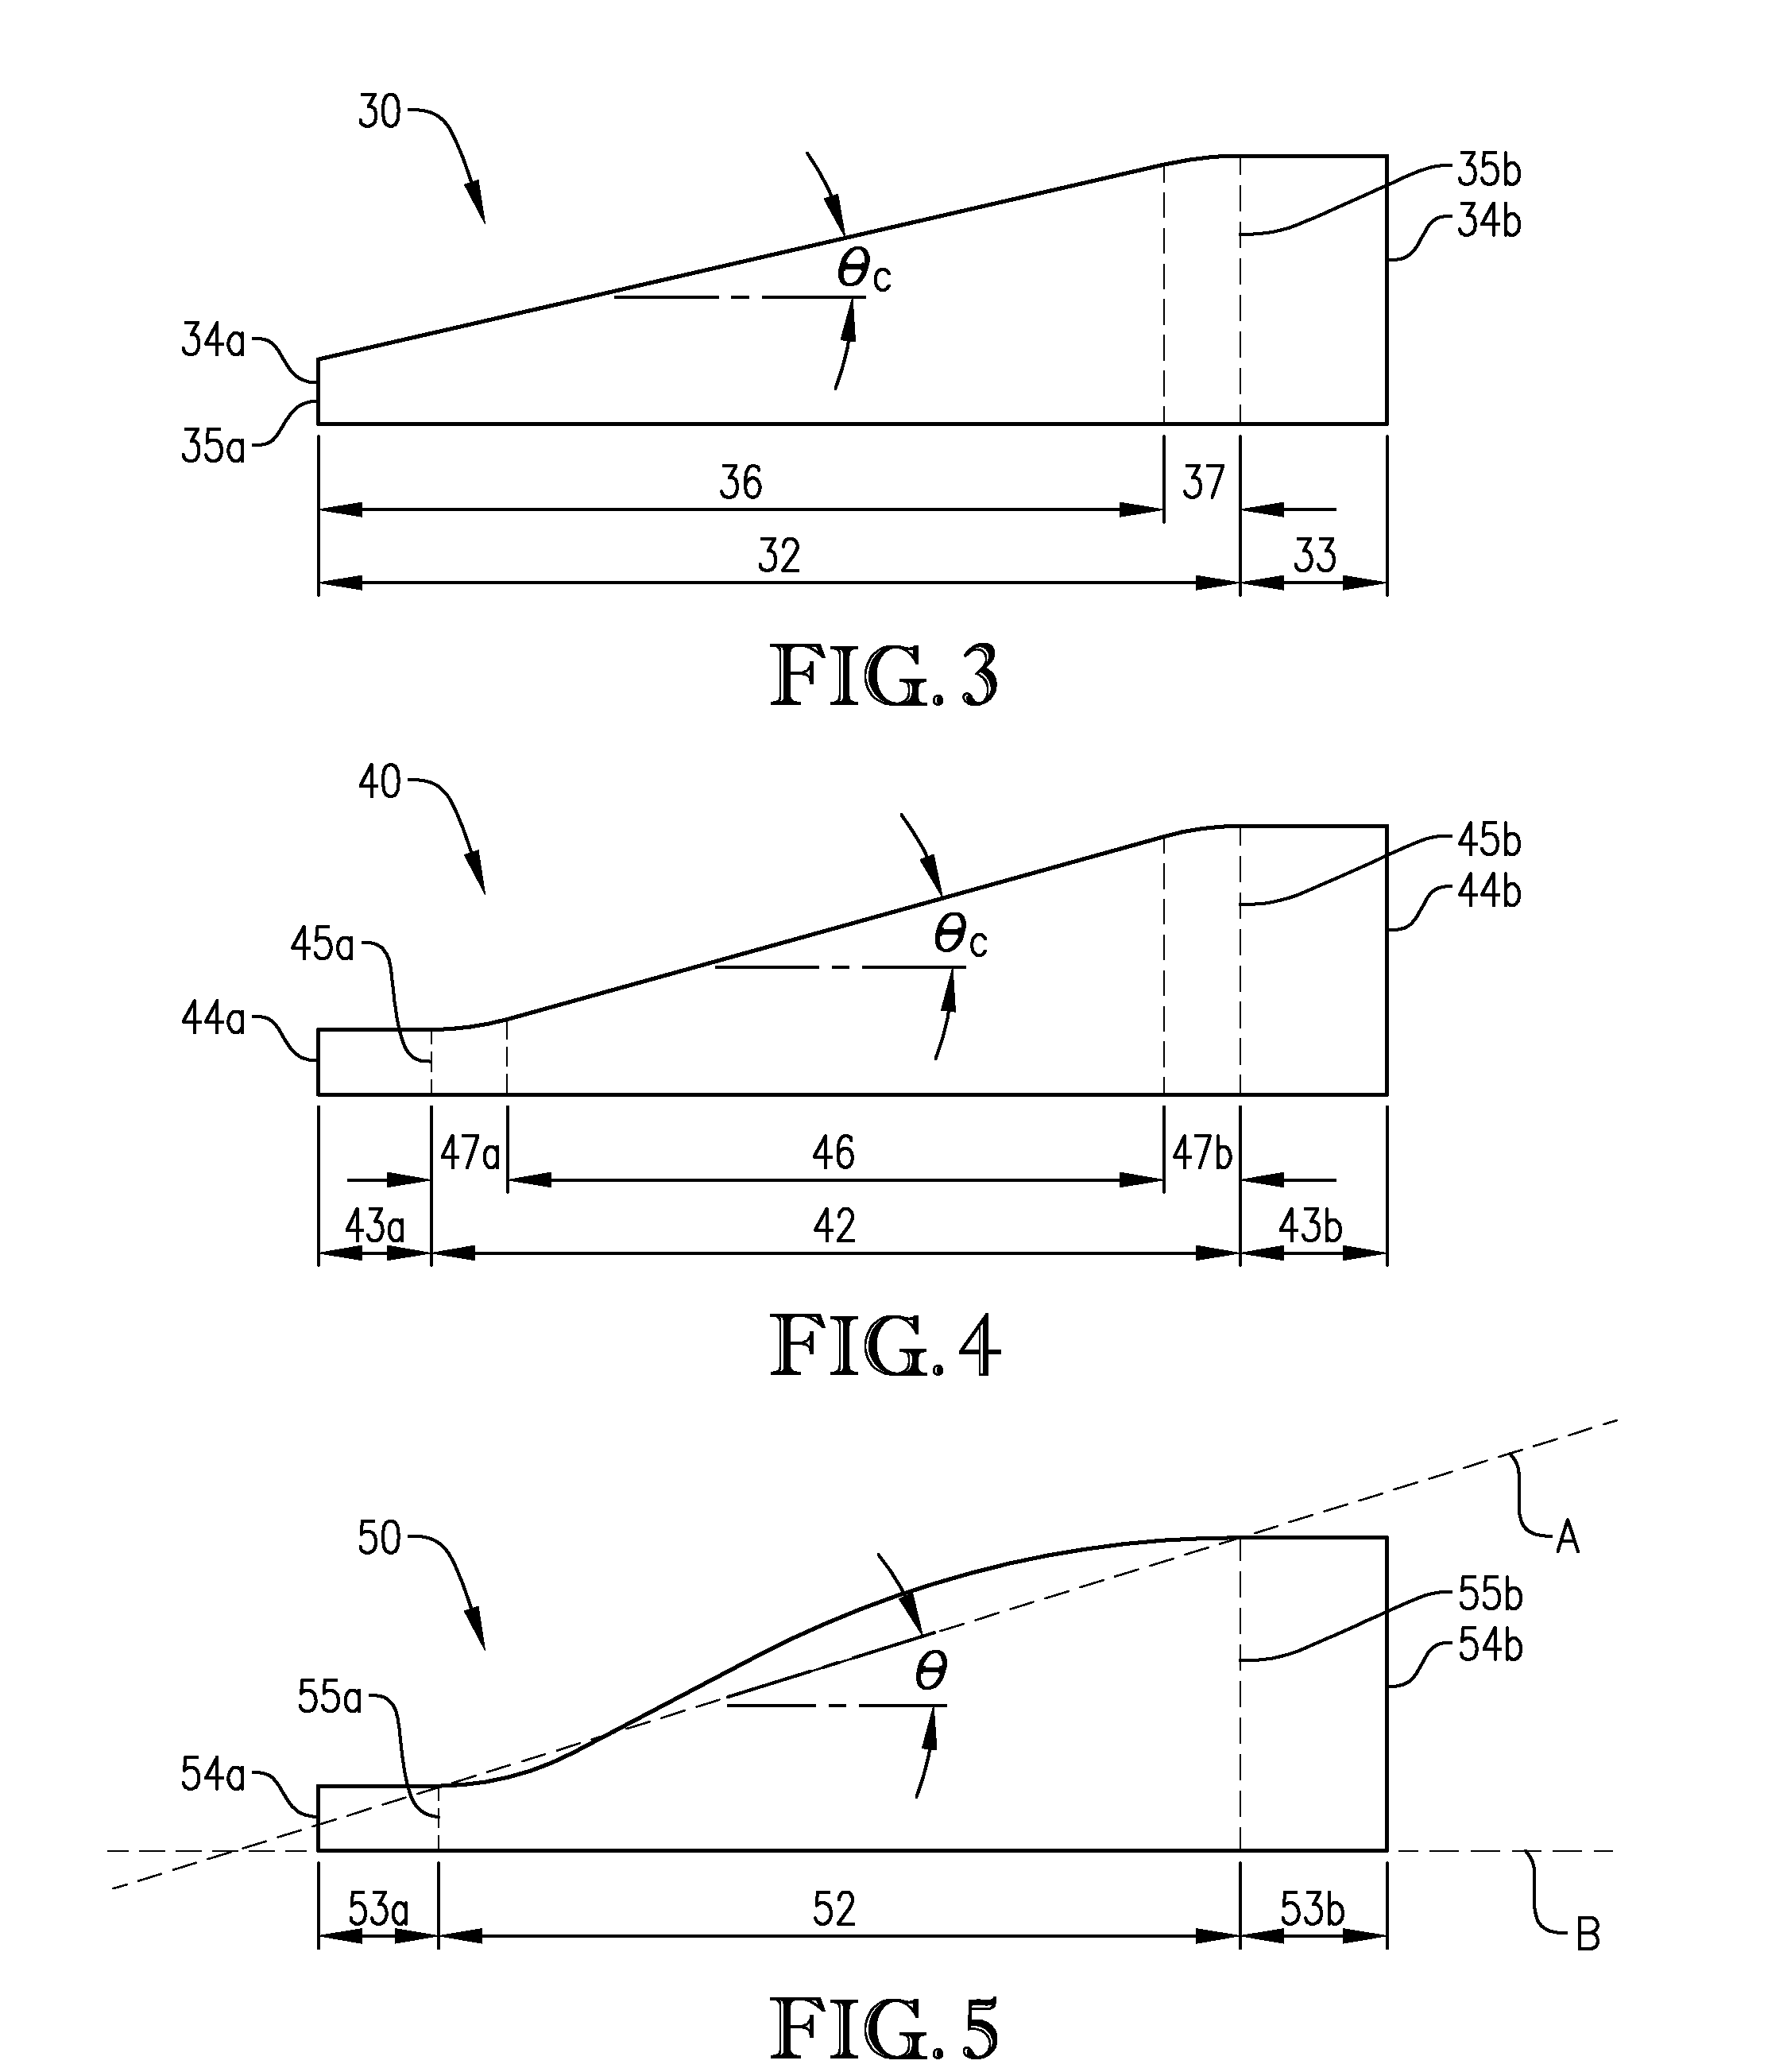 Poly(vinyl acetal) resin compositions, layers, and interlayers having enhanced optical properties